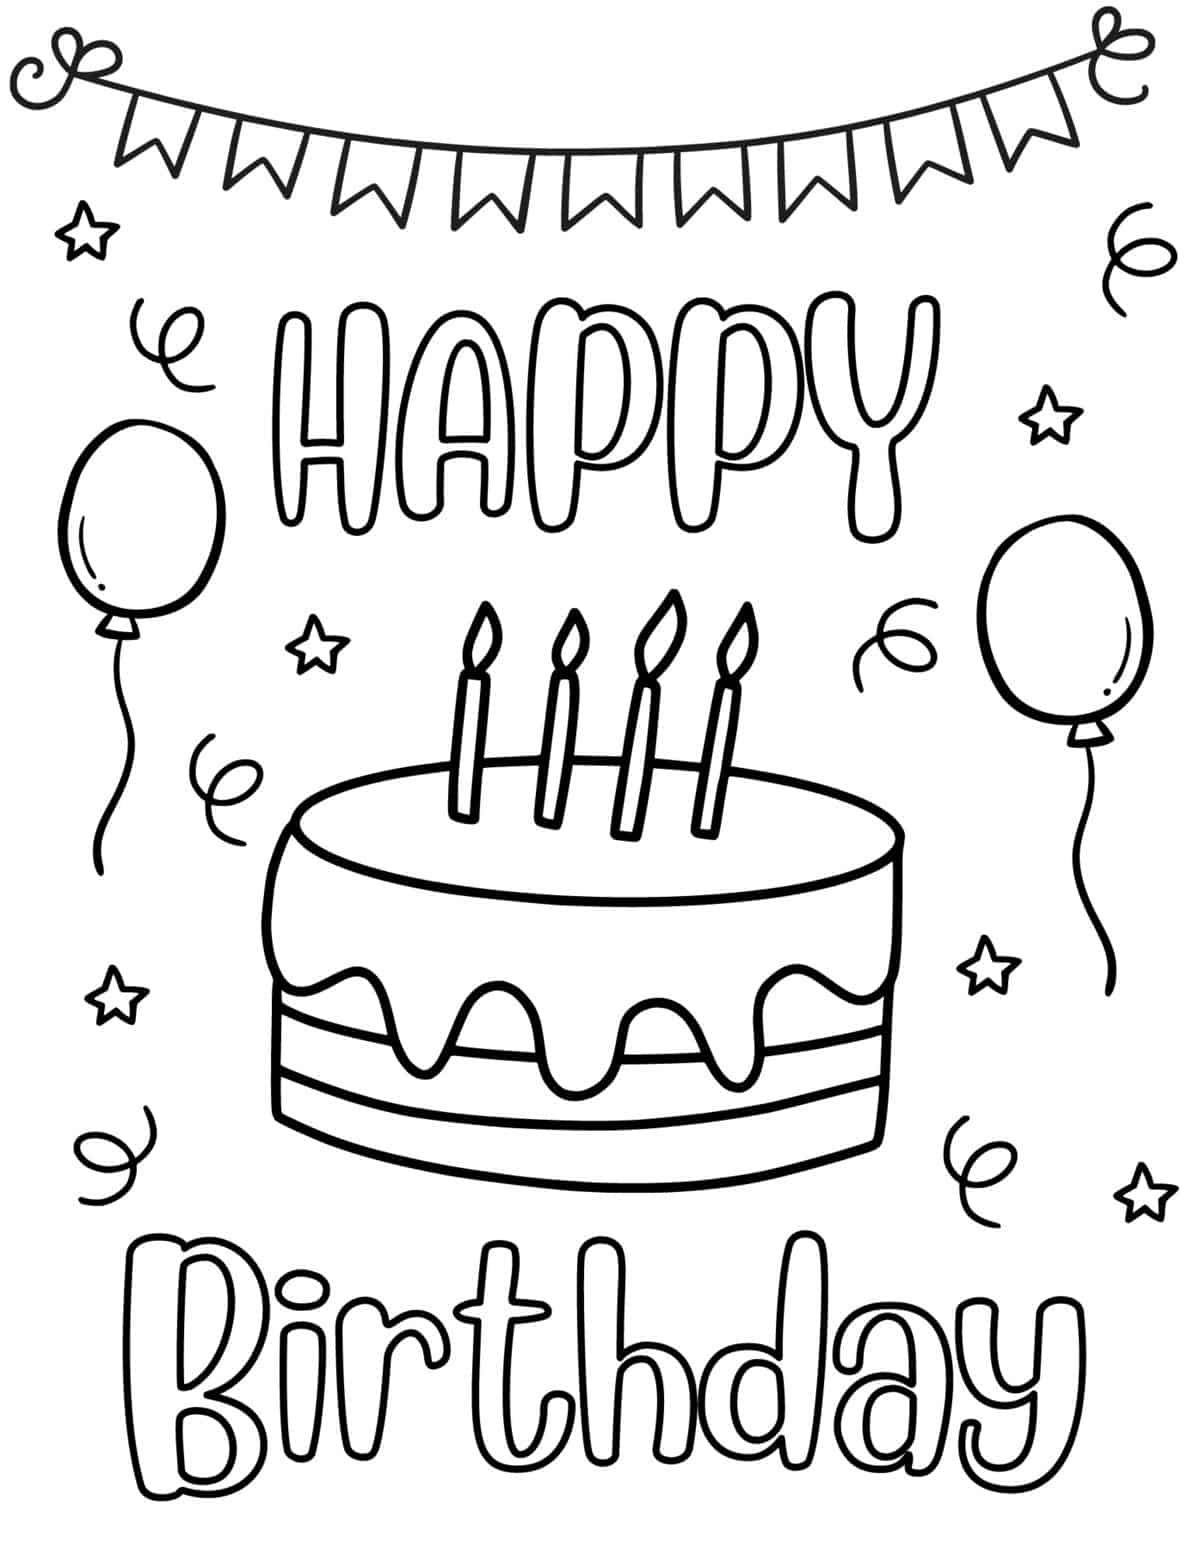 happy birthday cake coloring page